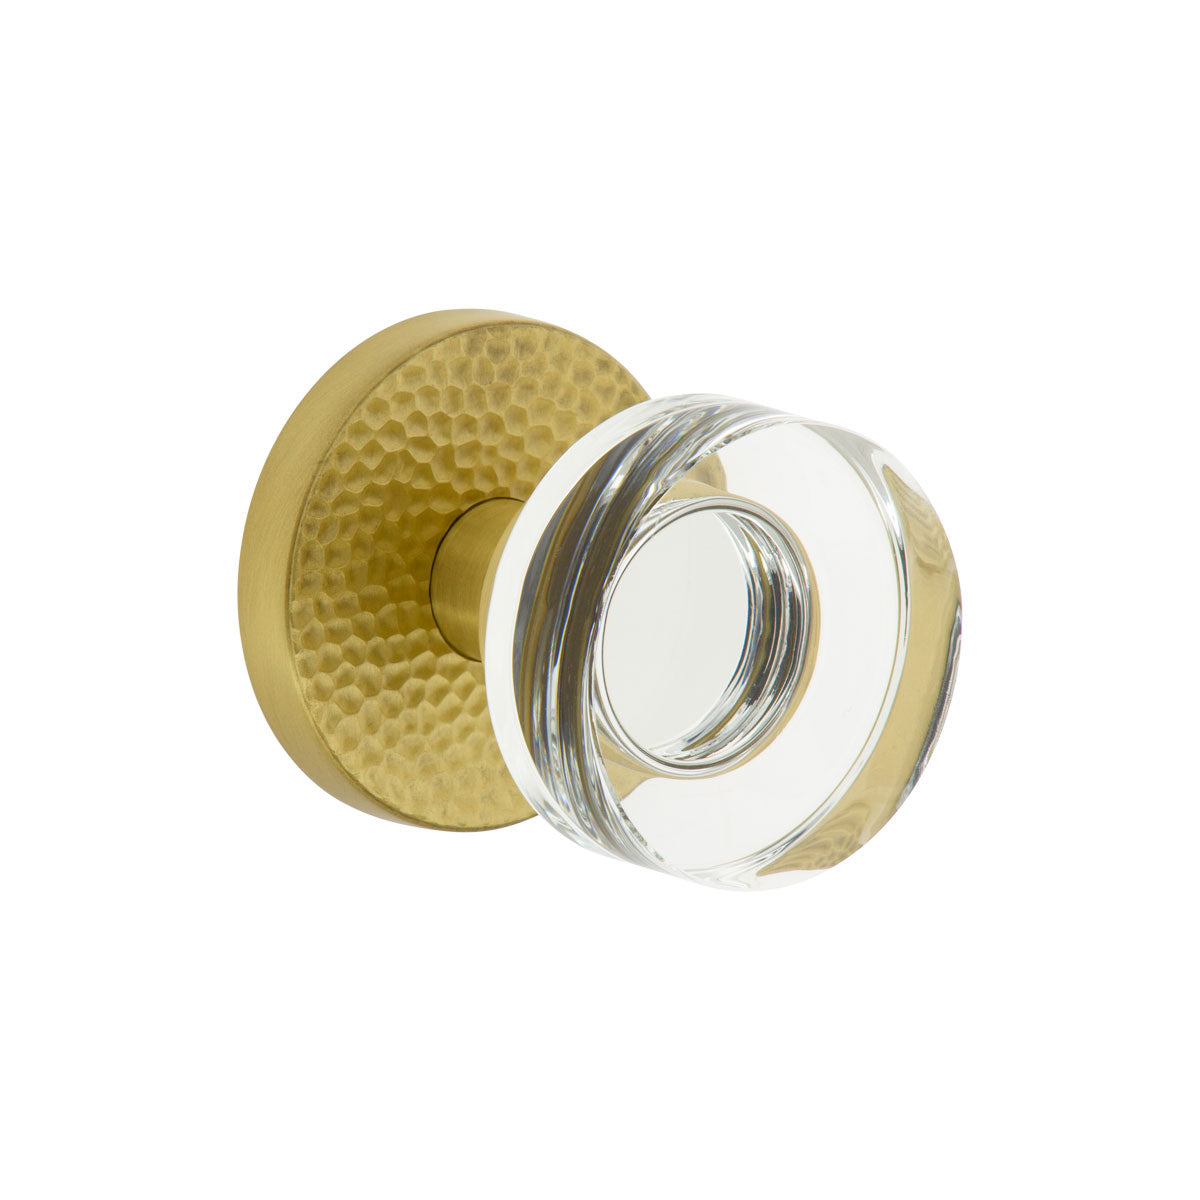 Circolo Hammered Rosette with Circolo Crystal Knob in Satin Brass